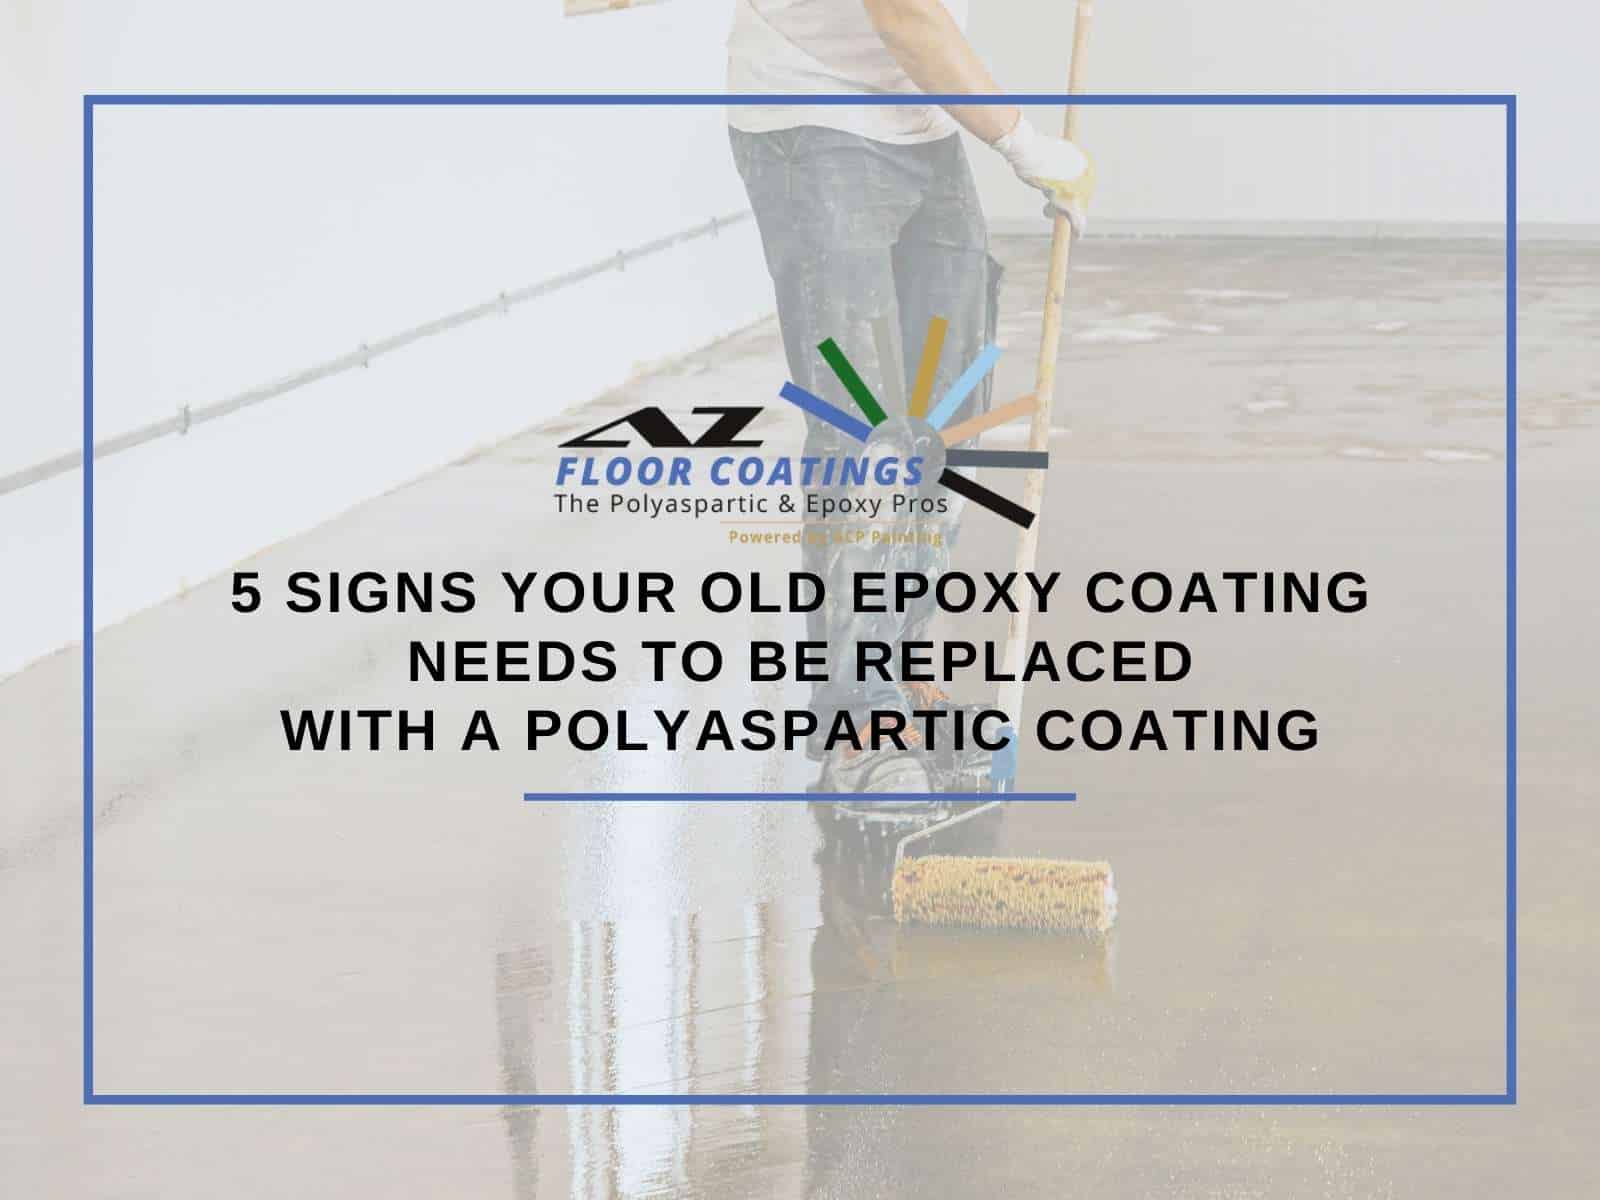 5 Signs Your Old Epoxy Coating Needs To Be Replaced With a Polyaspartic Coating